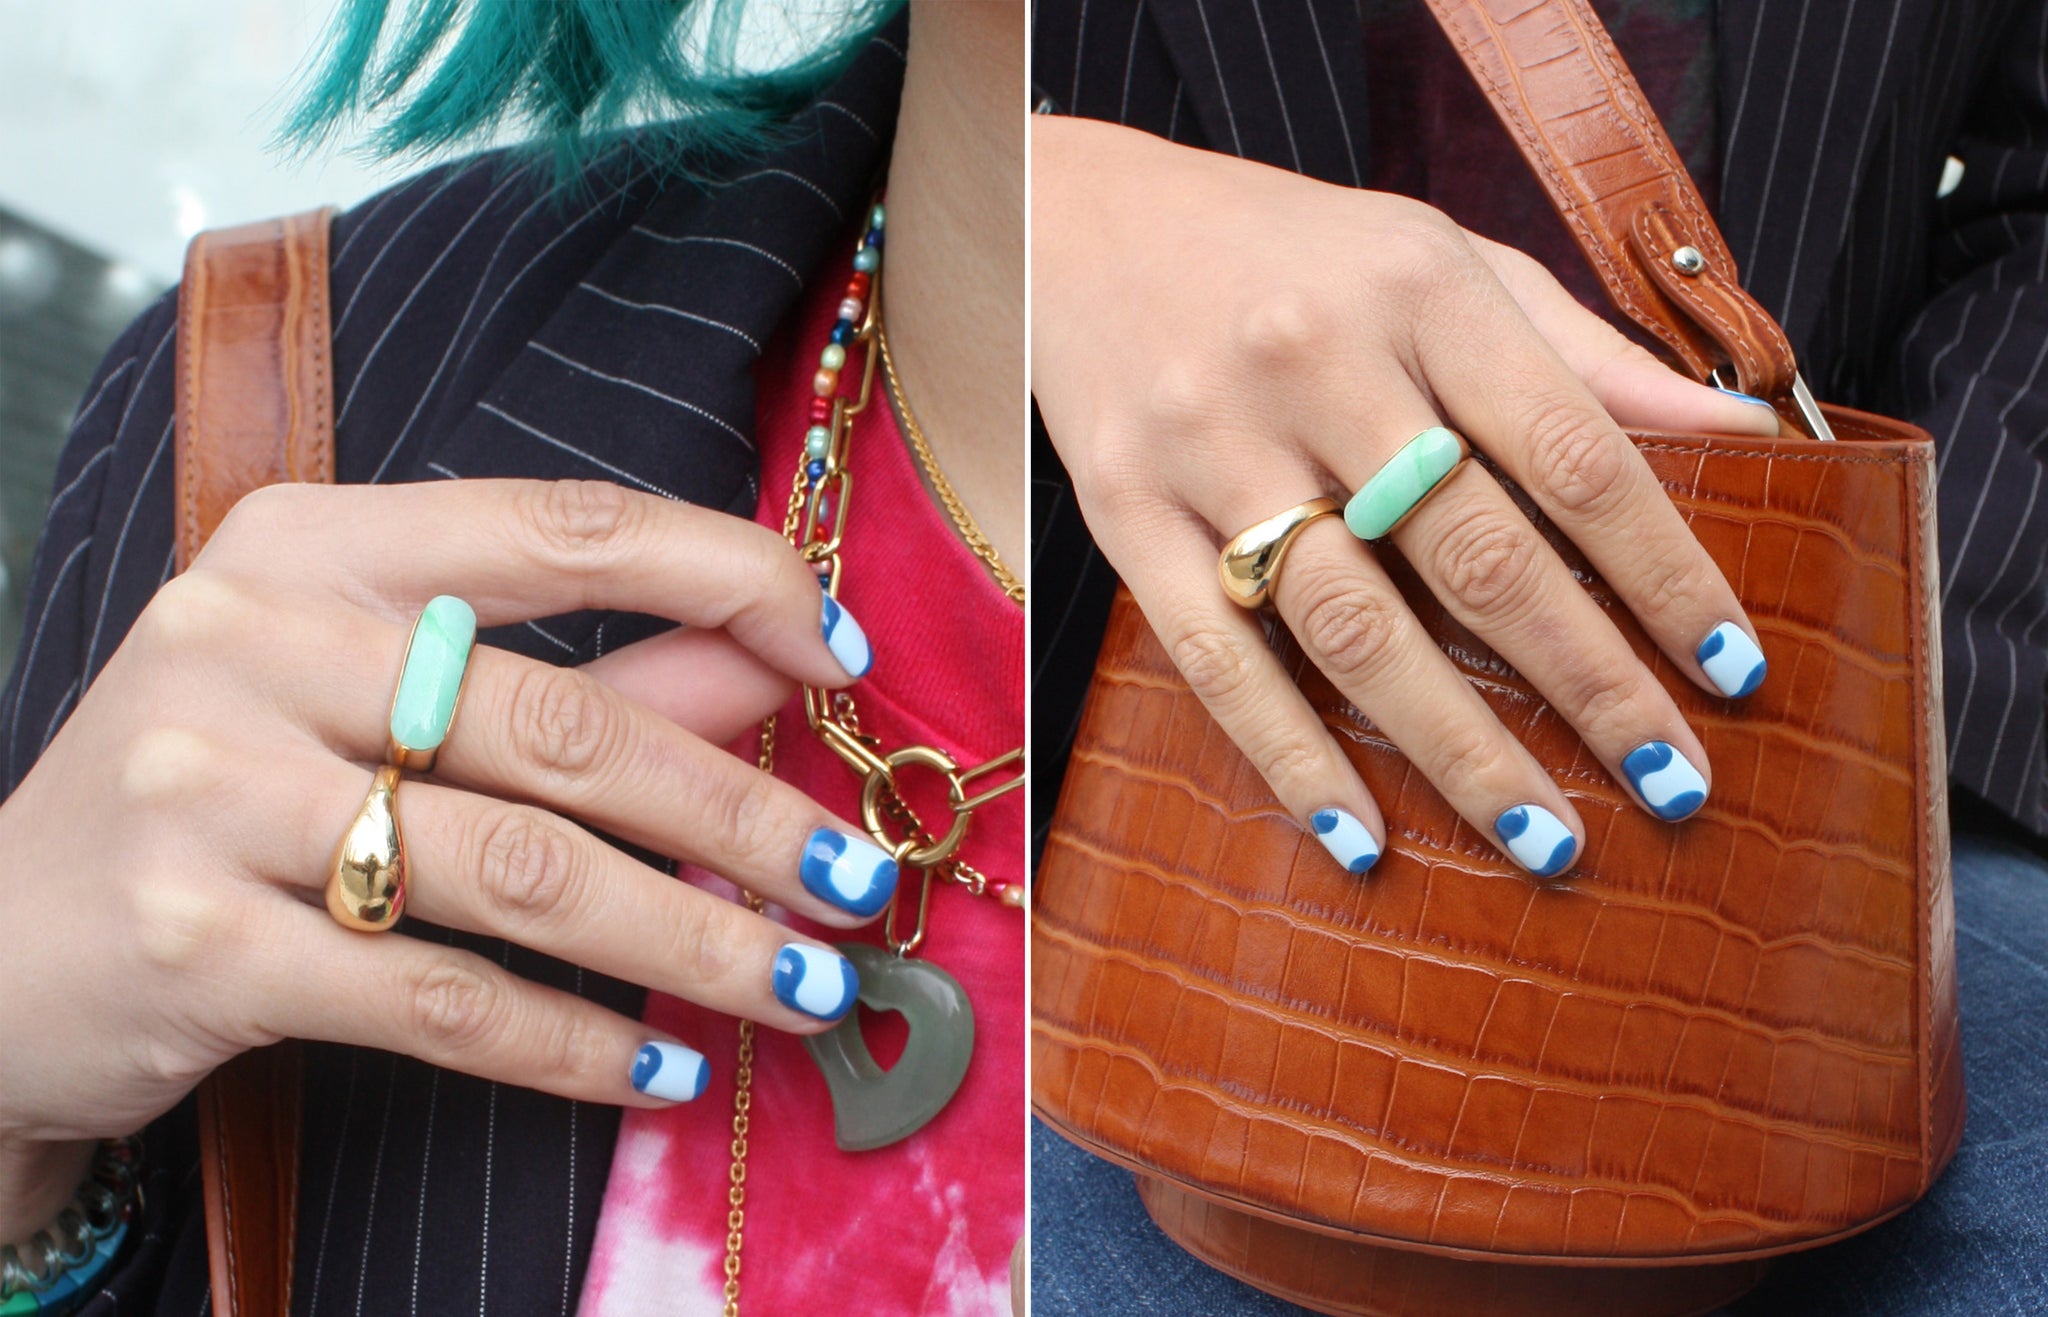 Nail Art Interview With Lifestyle Blog Lookvine - The Wagamama Diaries